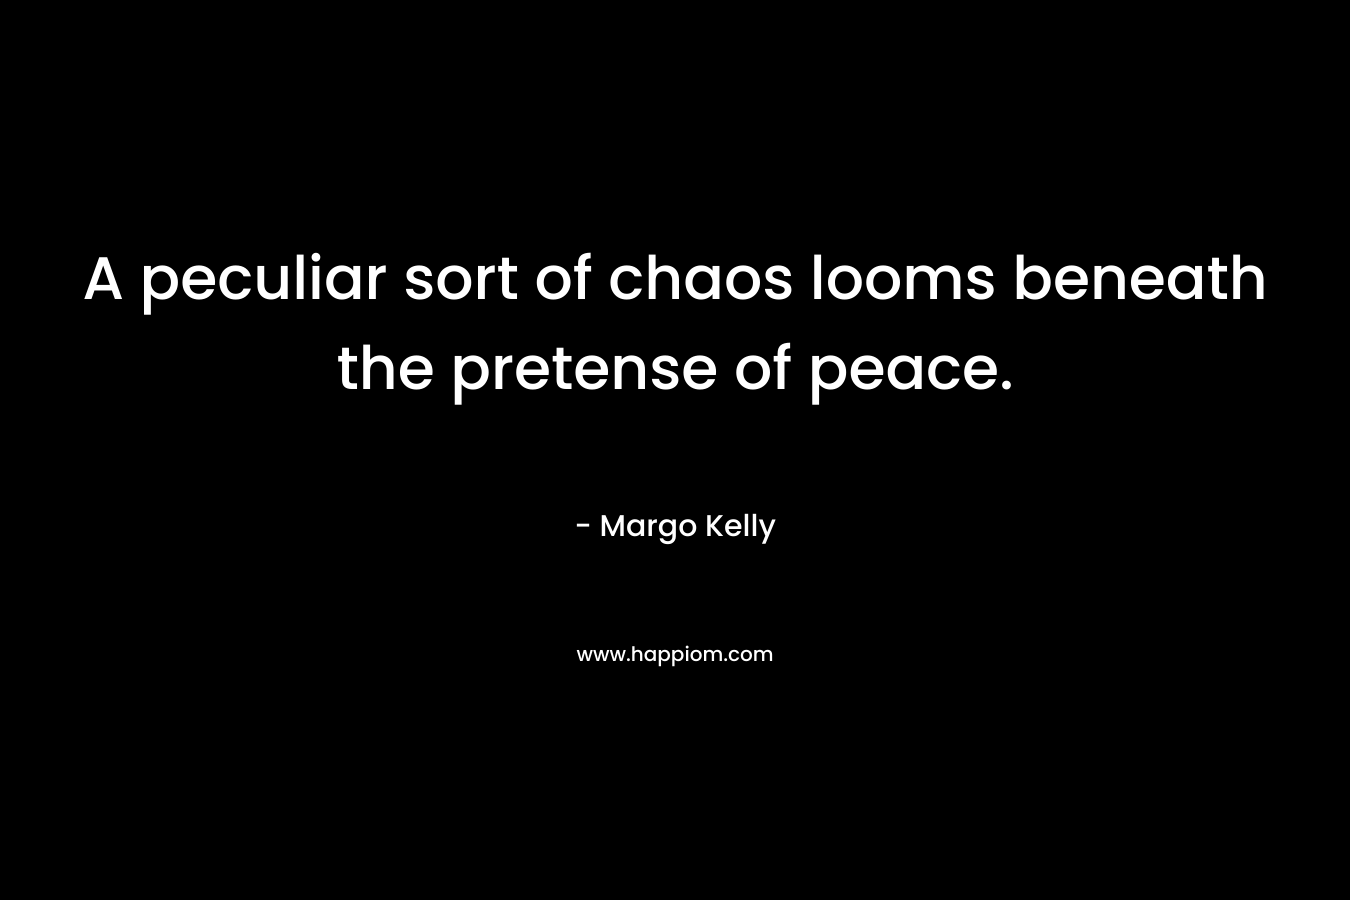 A peculiar sort of chaos looms beneath the pretense of peace.